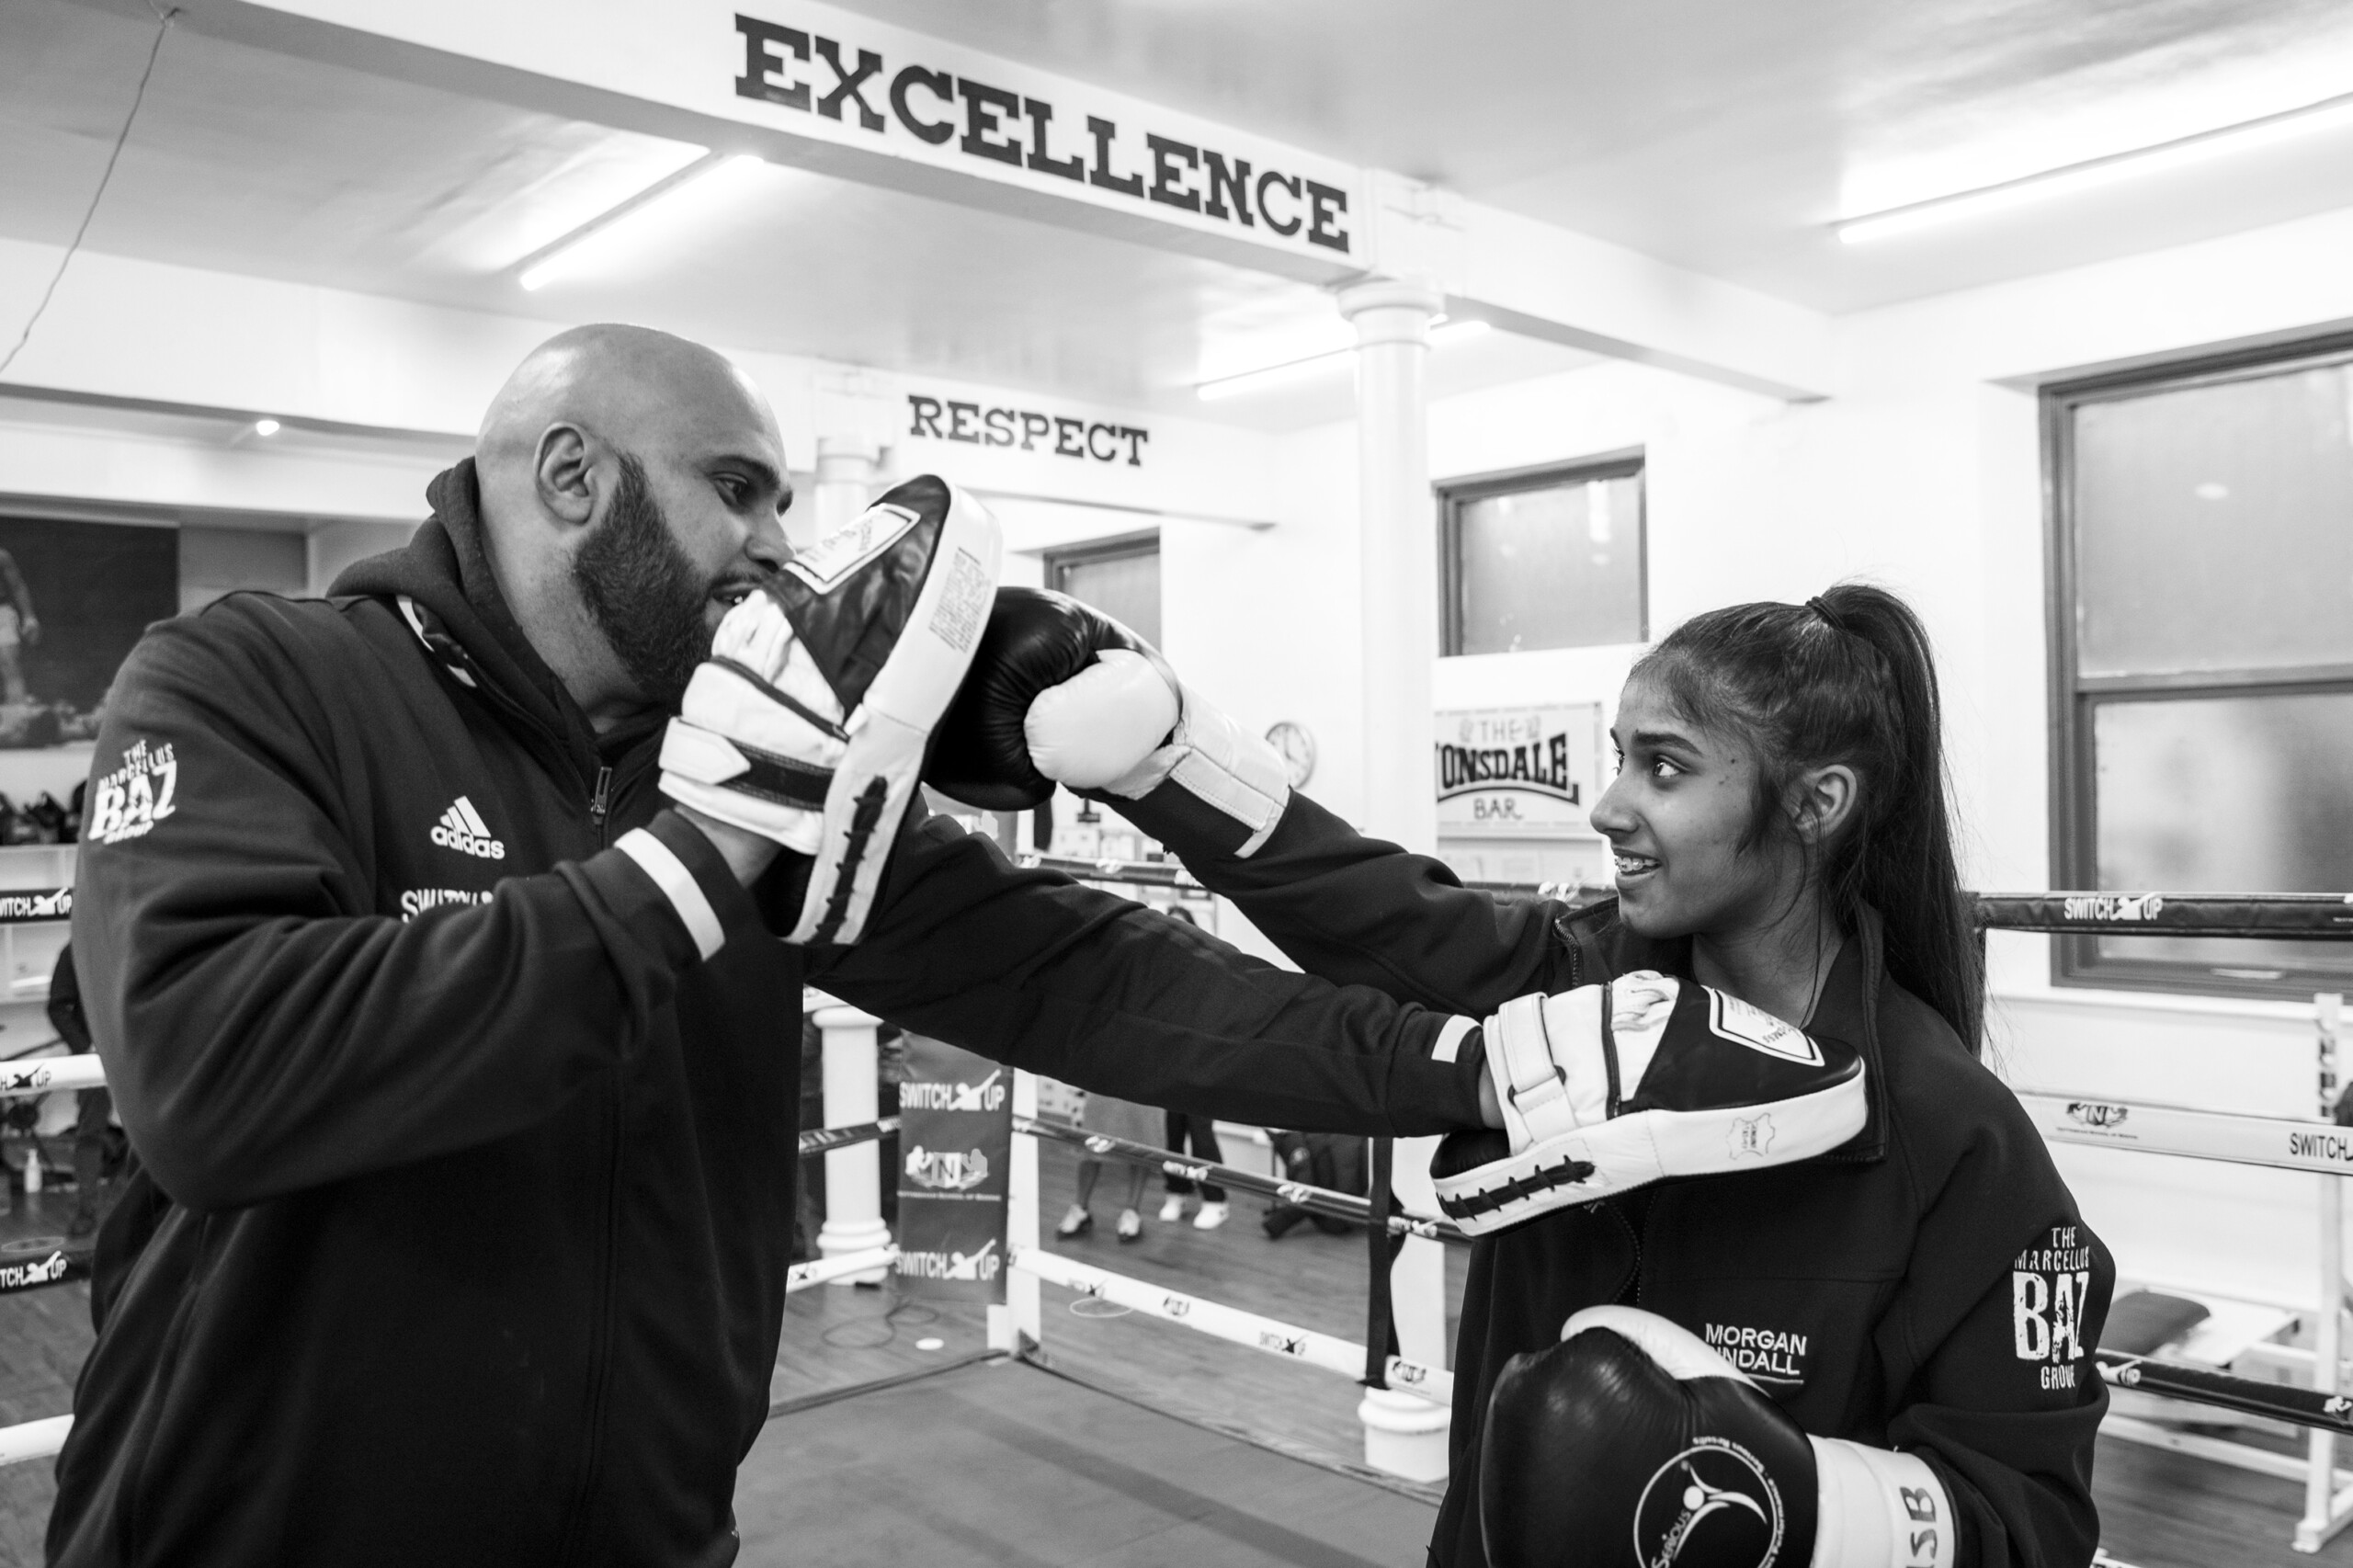 Safa in the ring with Baz for a boxing training session at Switch Up, Nottingham School of Boxing, Nottingham, United Kingdom. (photo by Andy Aitchison)